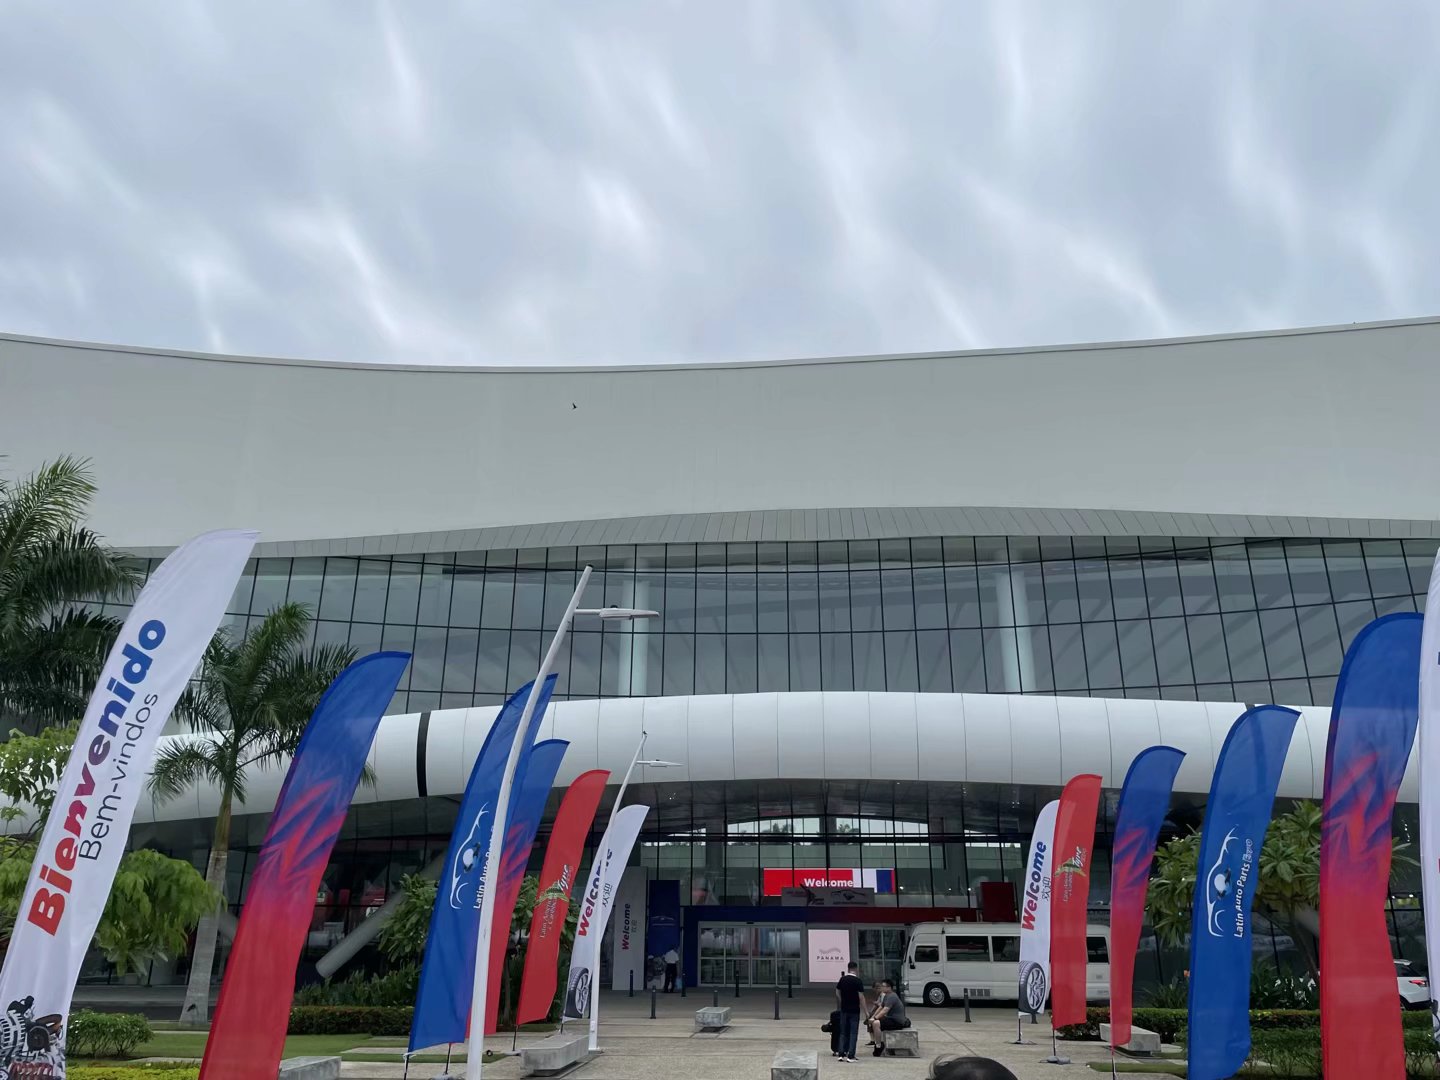 Forlander Tires Set to Make a Mark at the Panama Exhibition